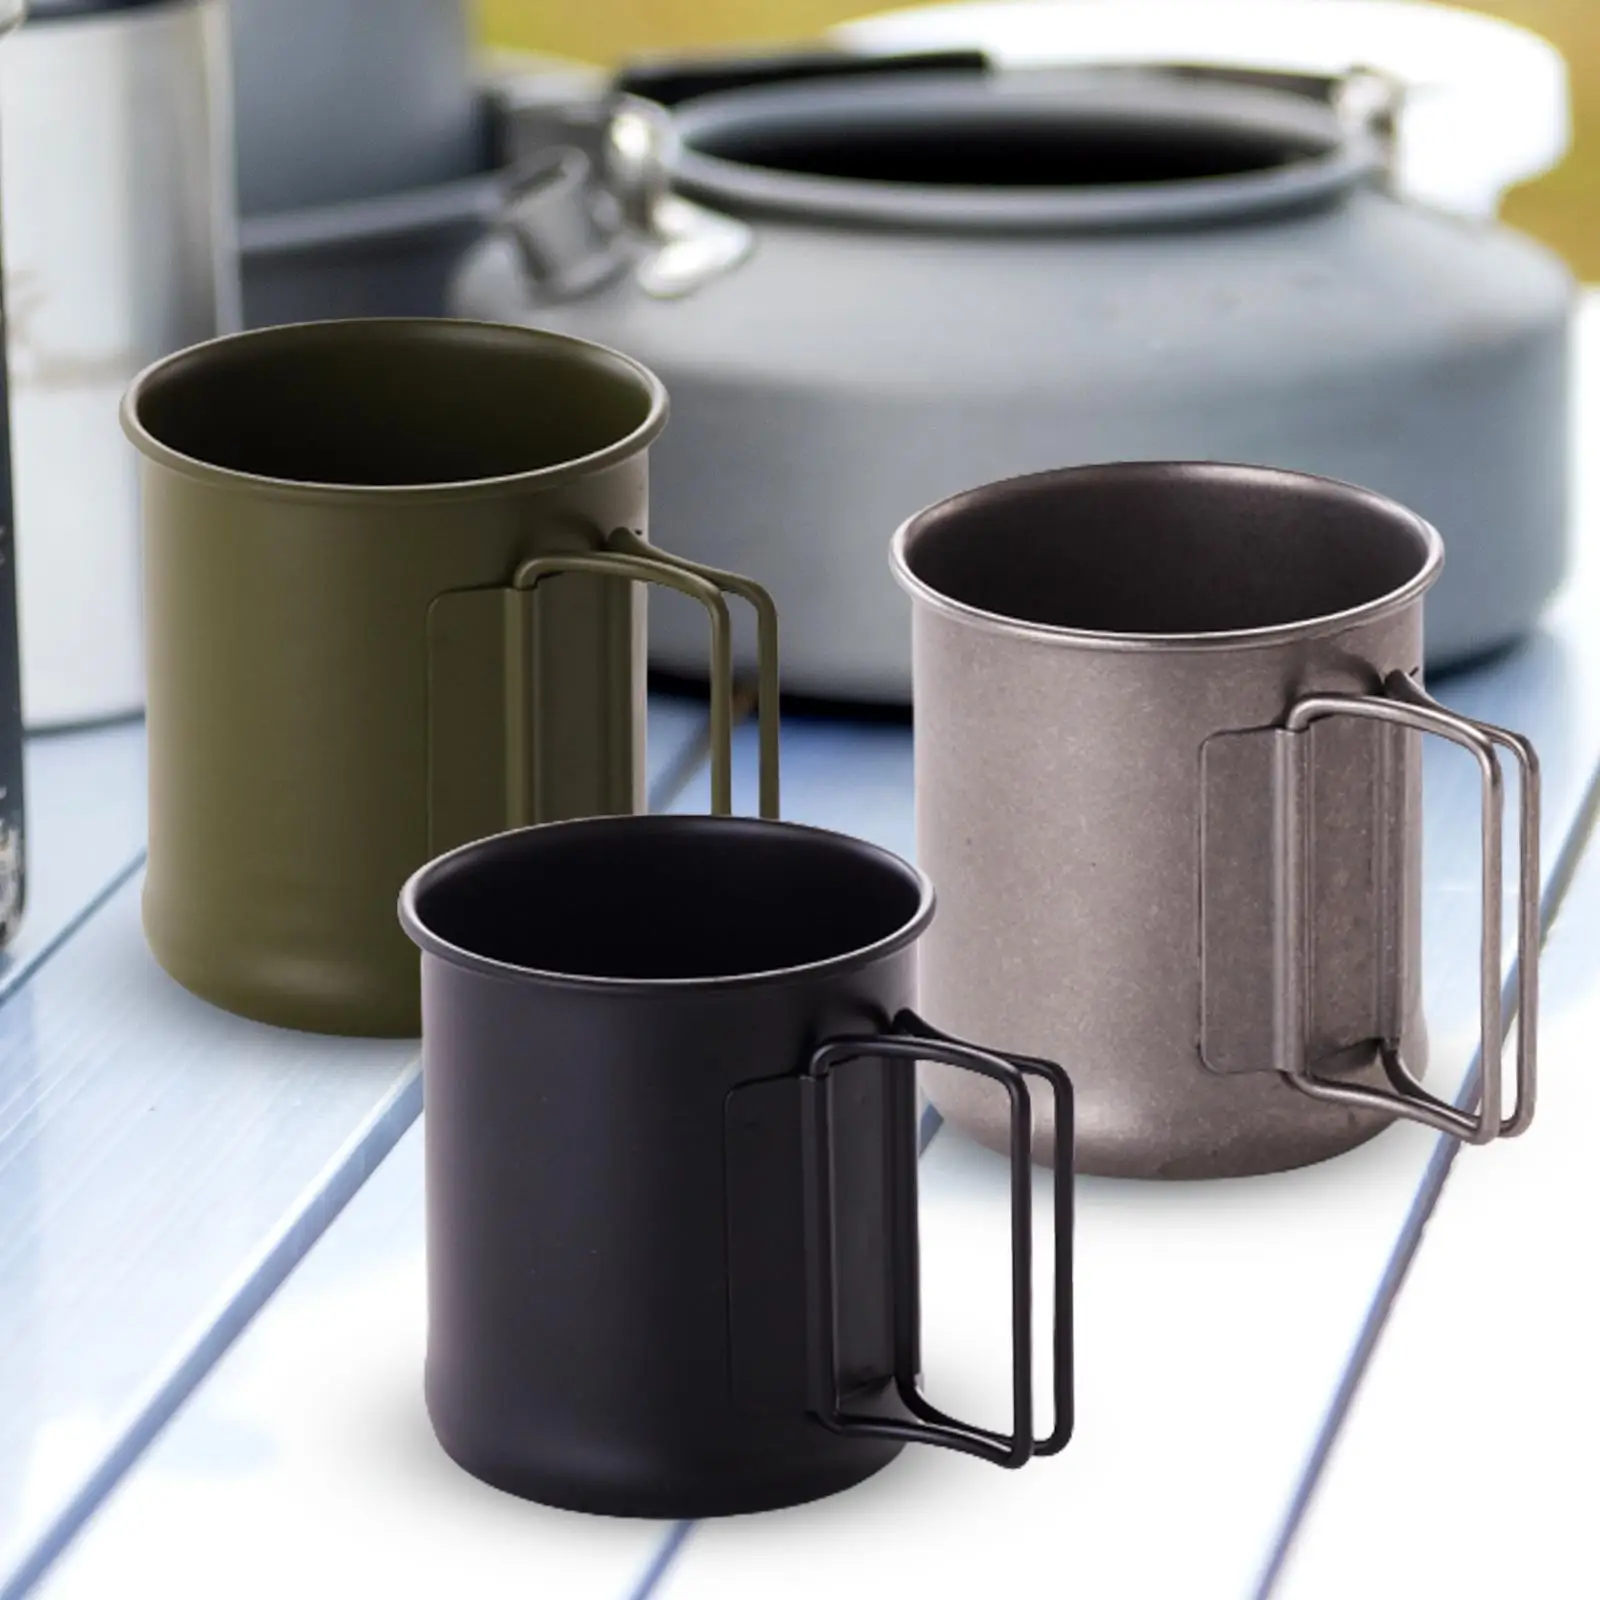 Stainless Steel Camping Mug, 1ml Water Cup with Foldable Handles for Outdoor